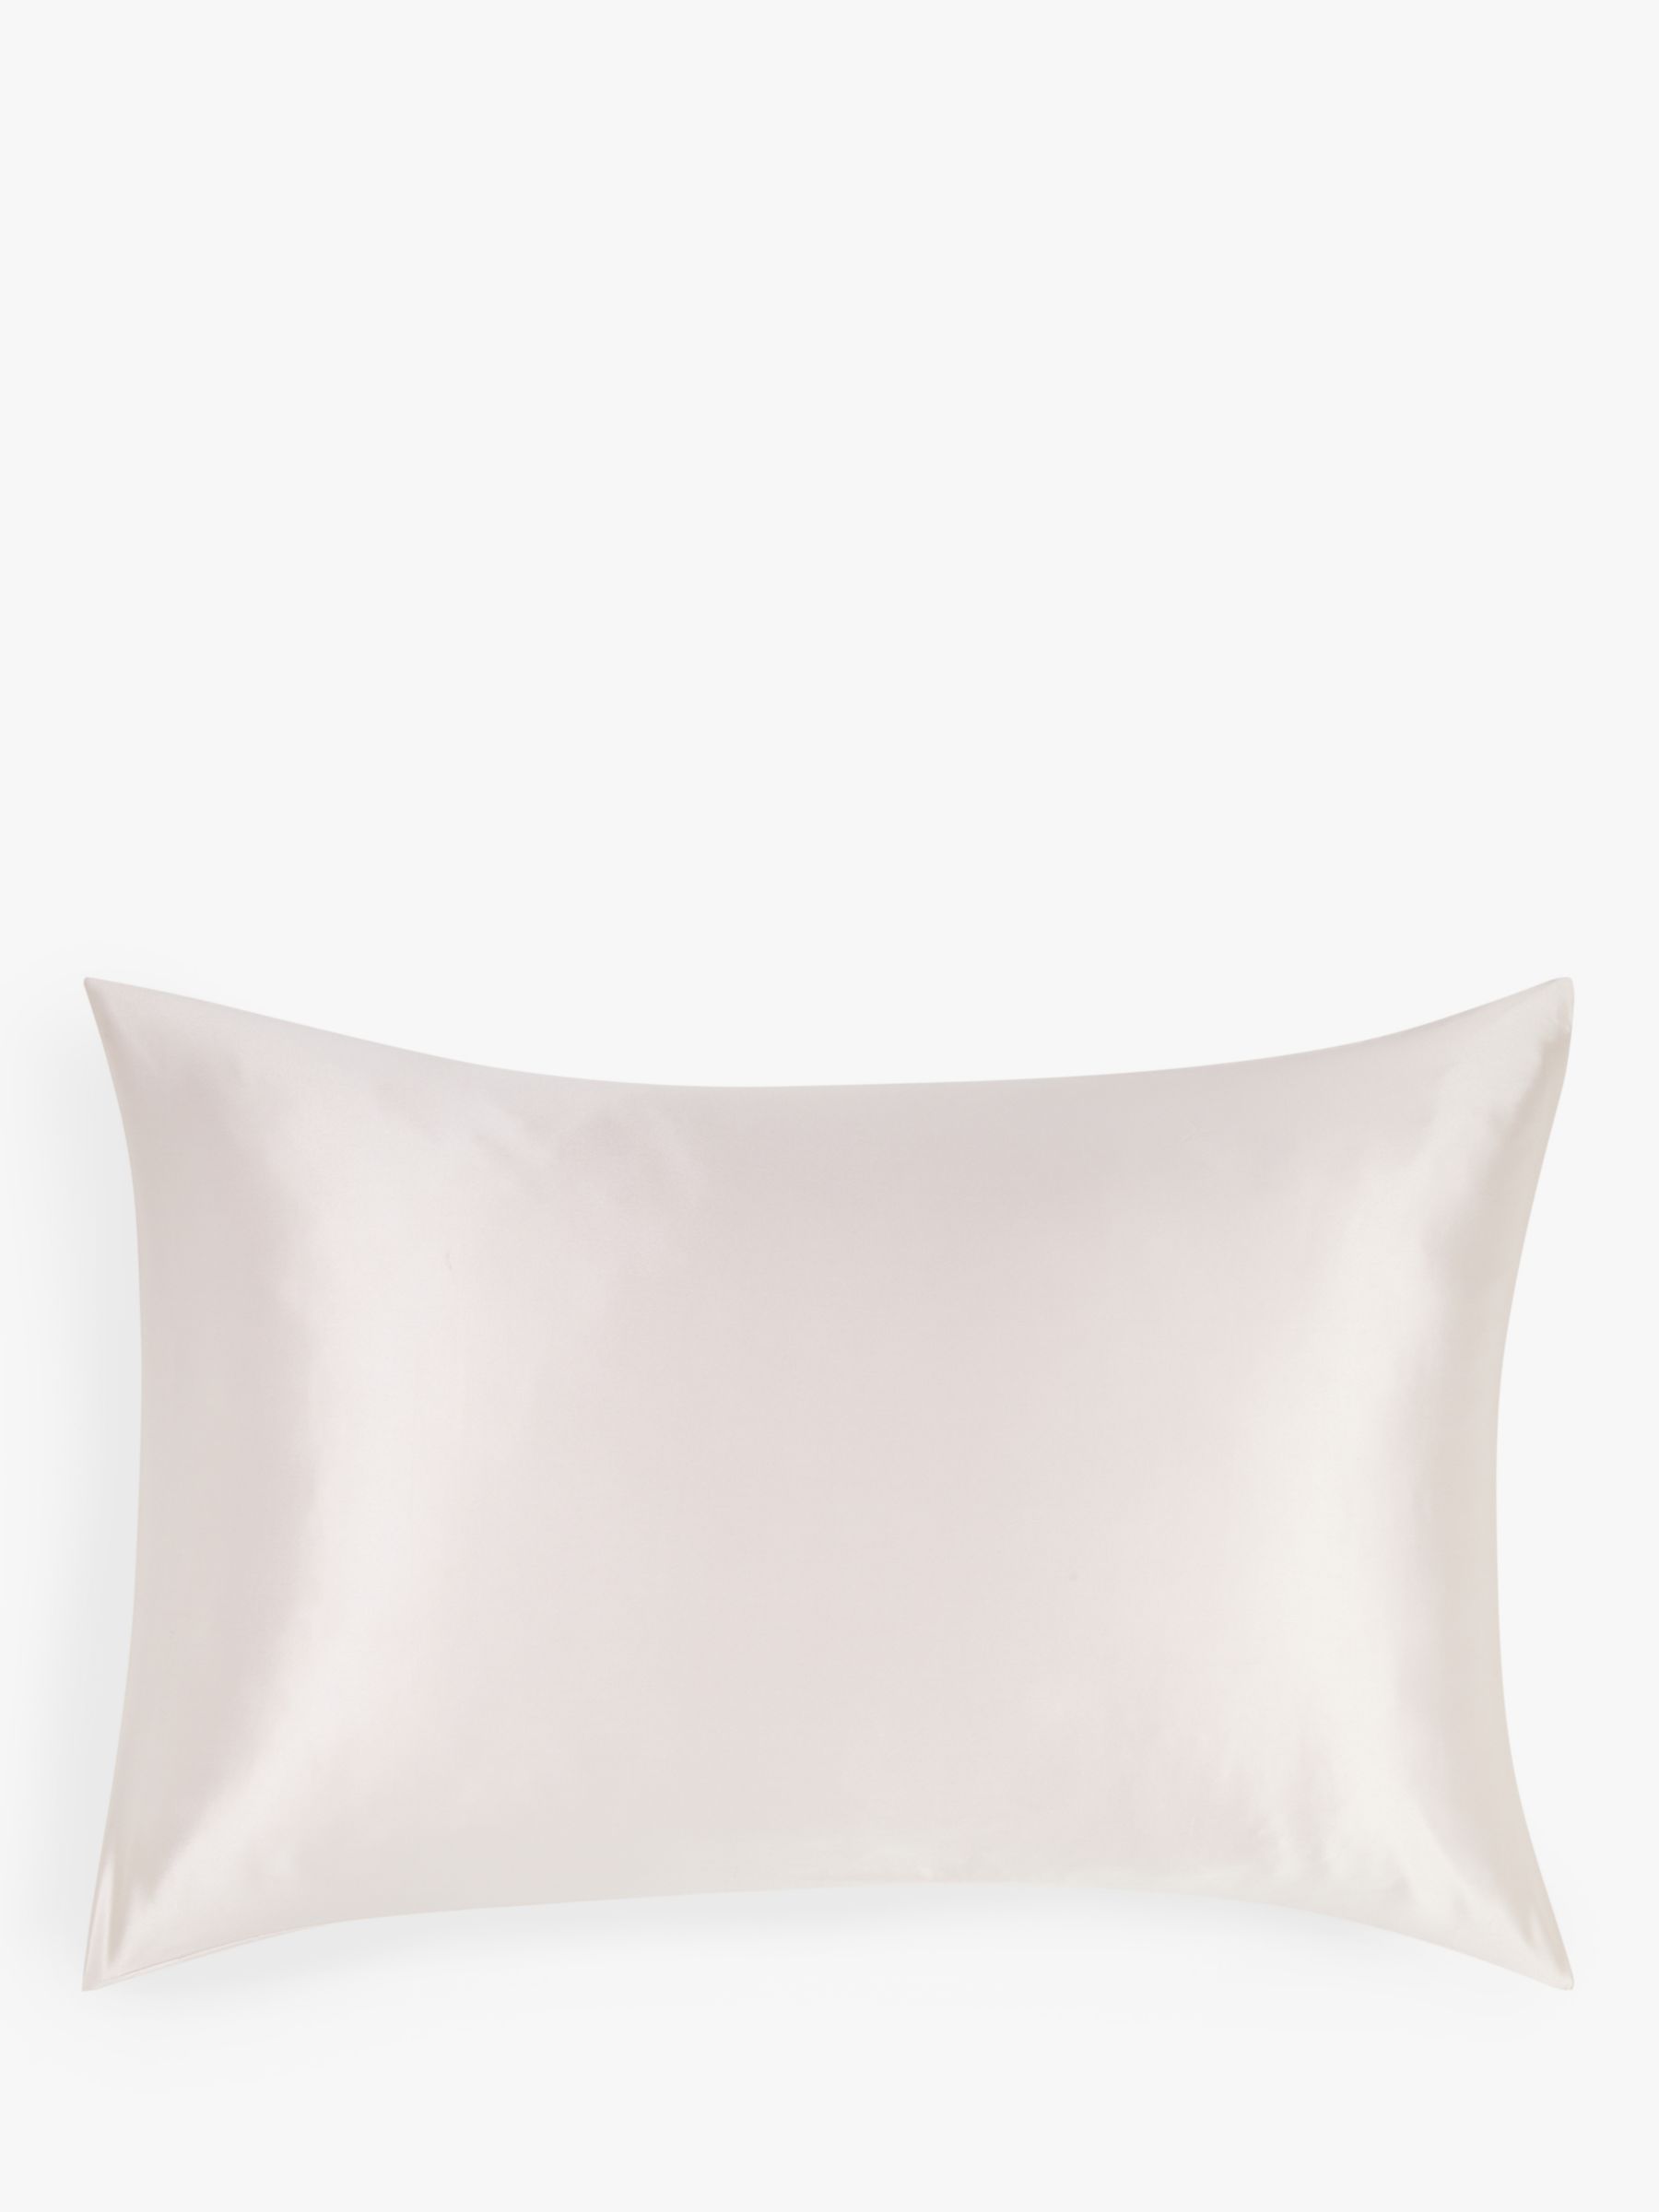 John Lewis & Partners The Ultimate Collection Silk Standard Pillowcase, Pale Pink